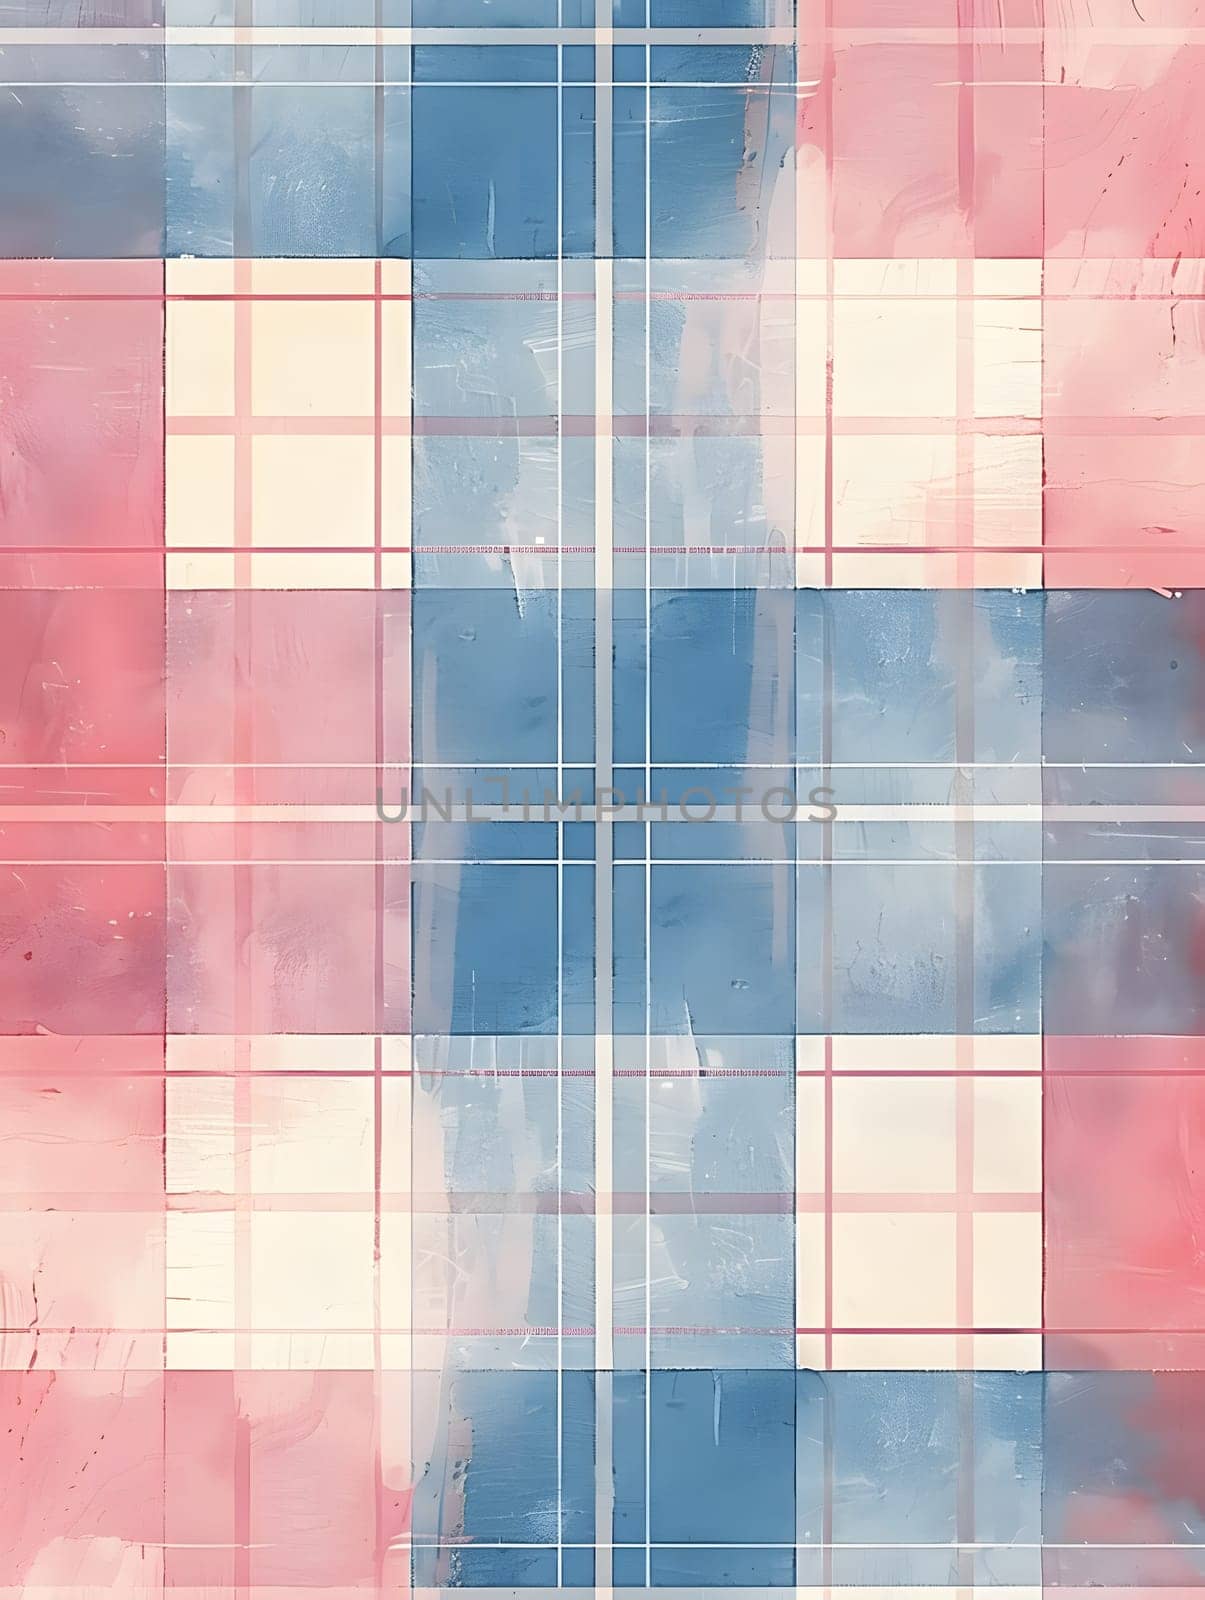 Tartan rectangle art with red, white, and blue plaid over cloudy sky by Nadtochiy